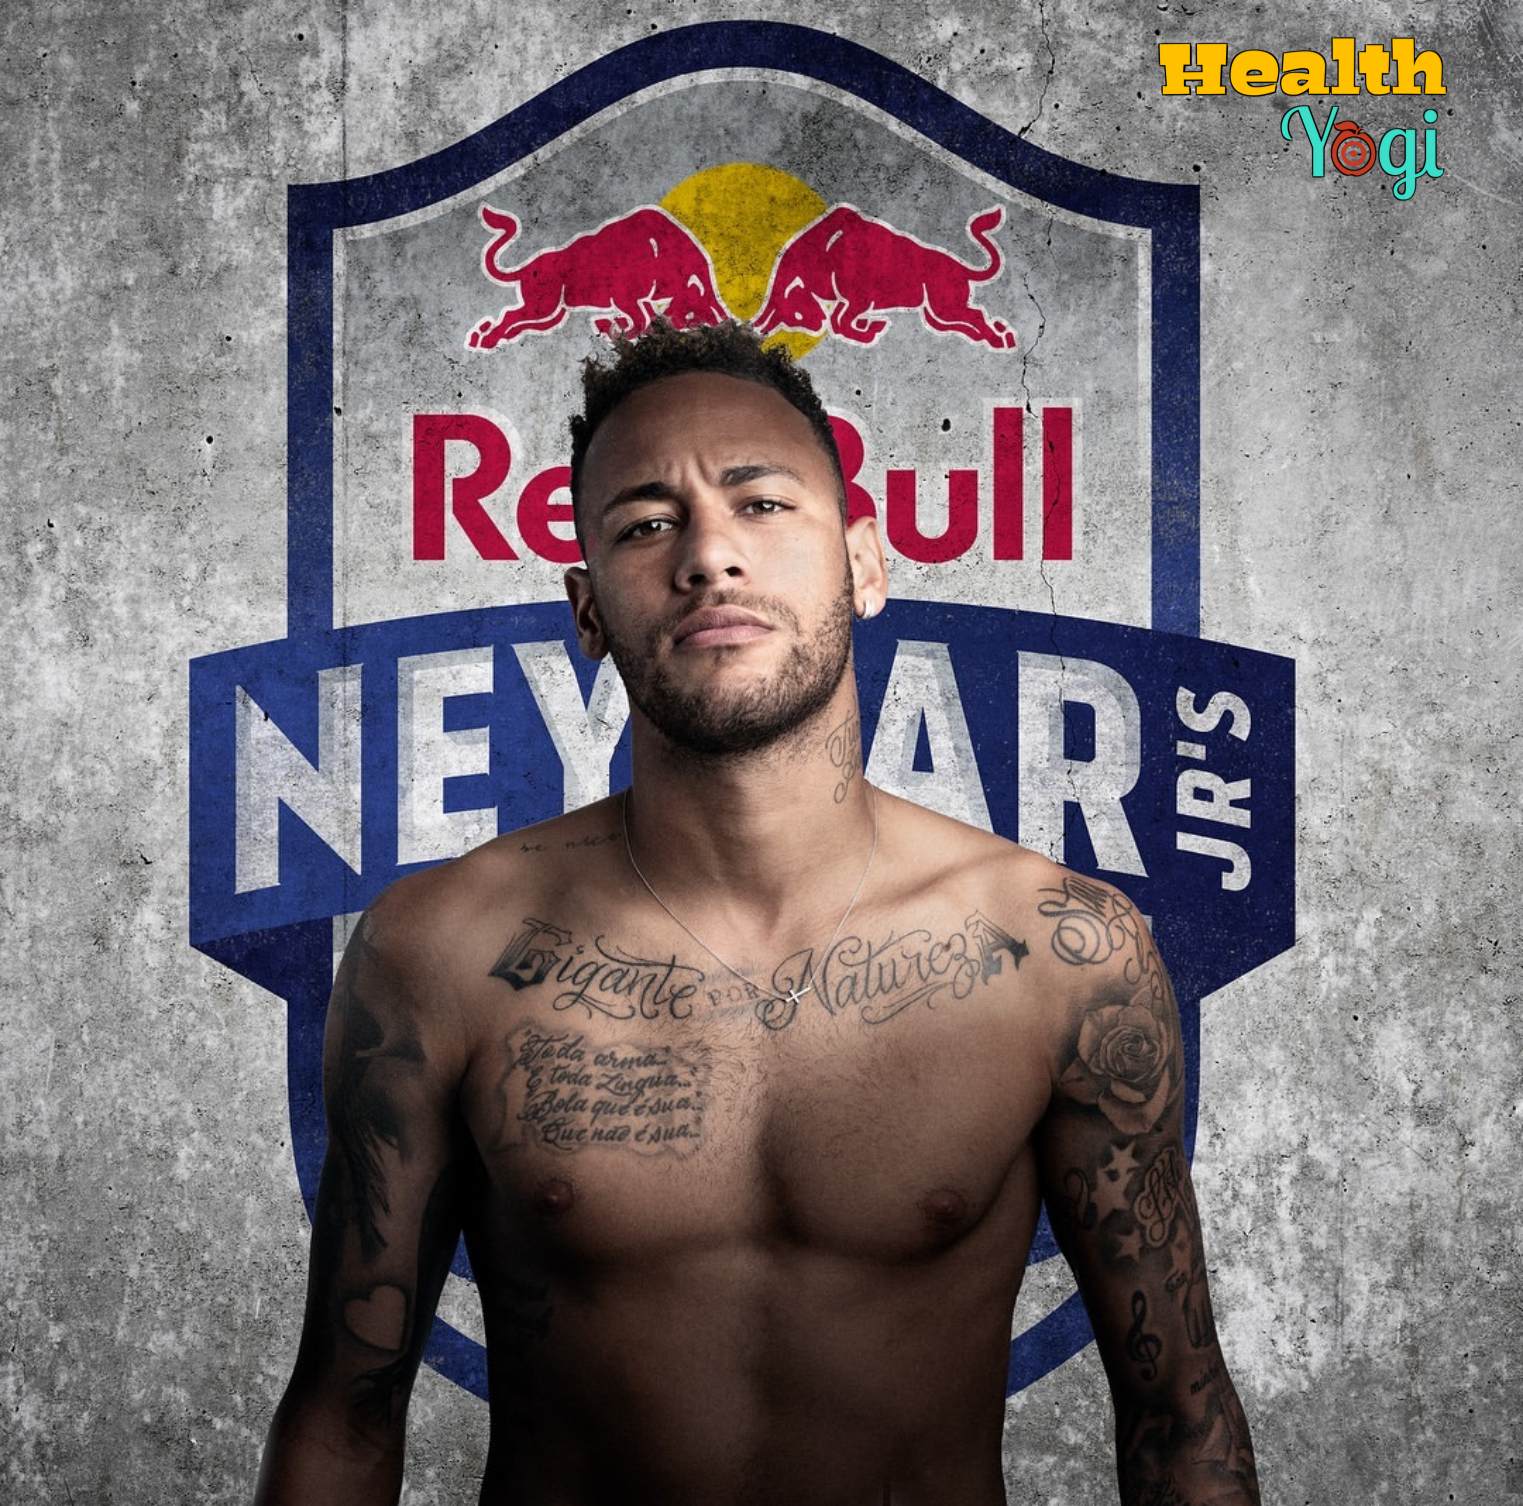 Neymar Exercise Routine and Meal Plan